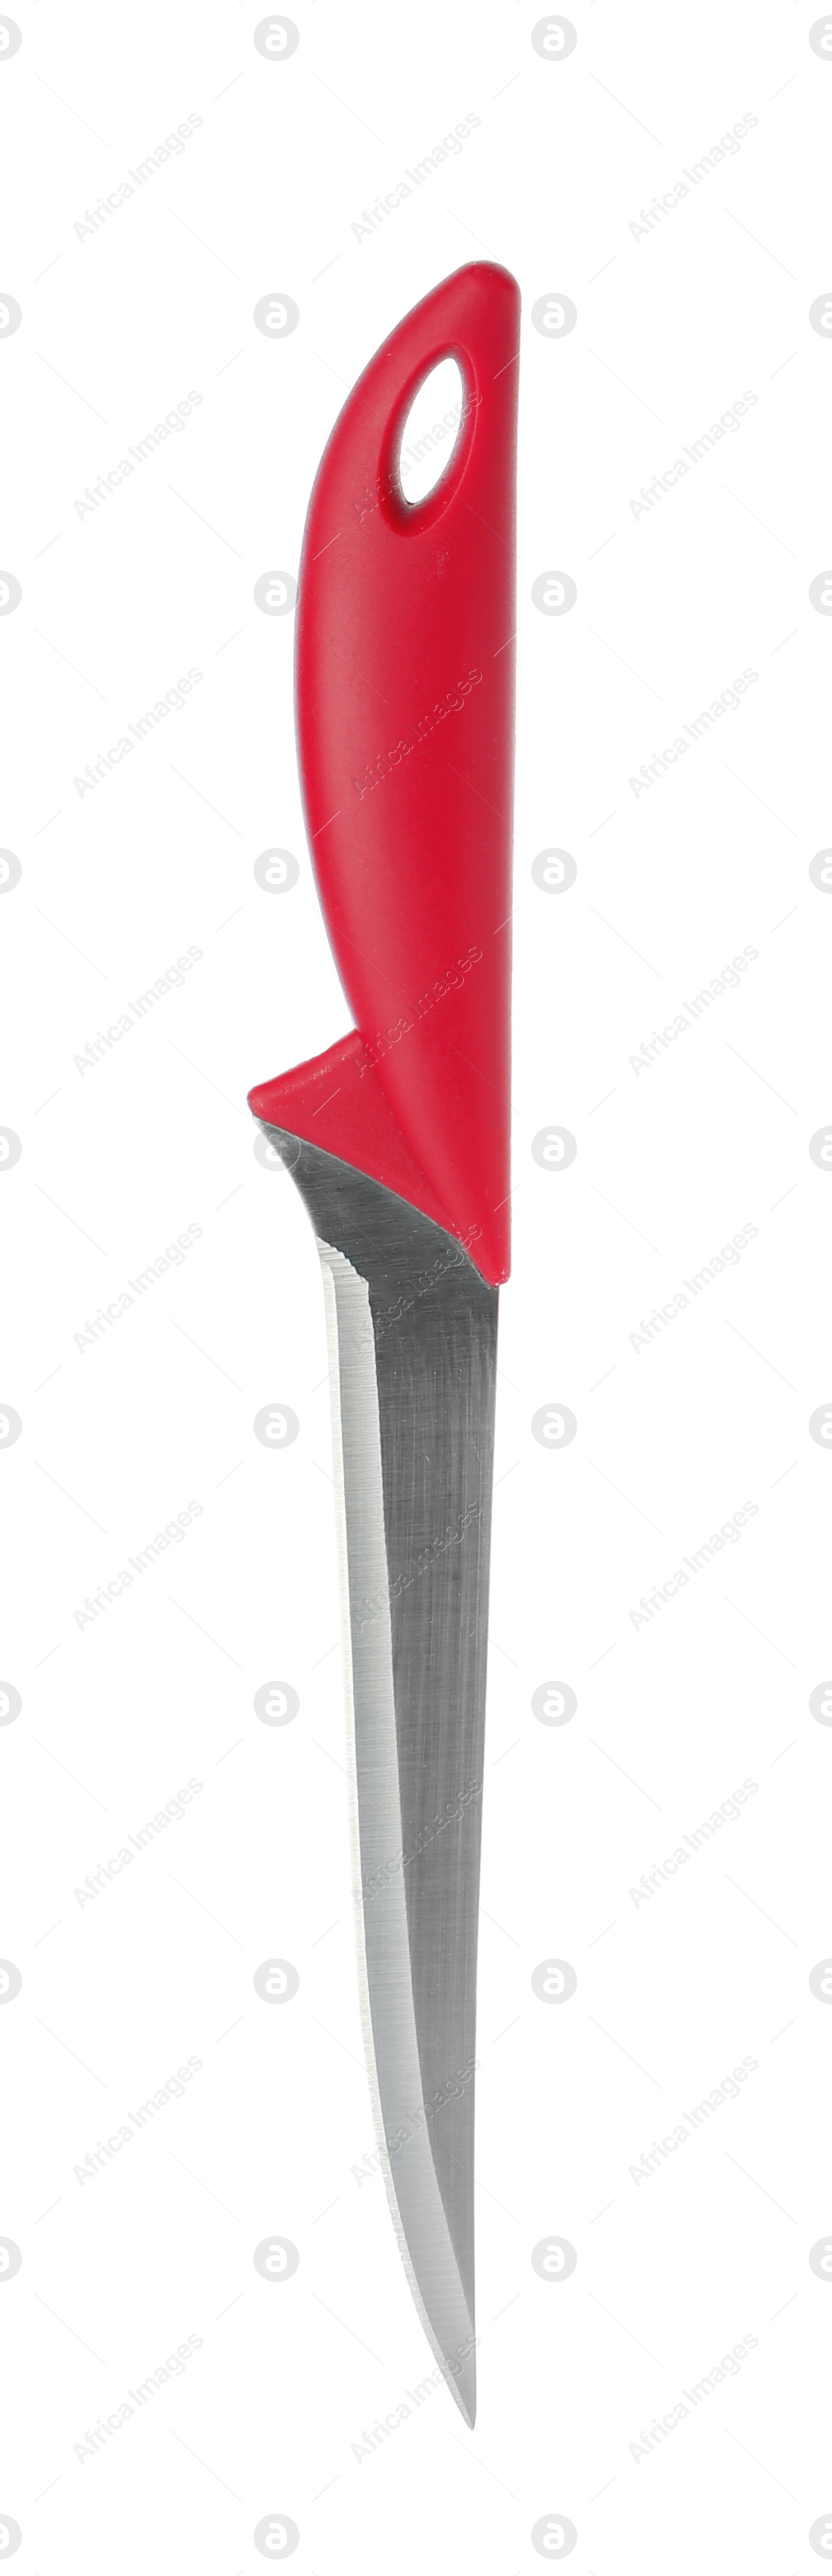 Photo of Boning knife with red handle isolated on white